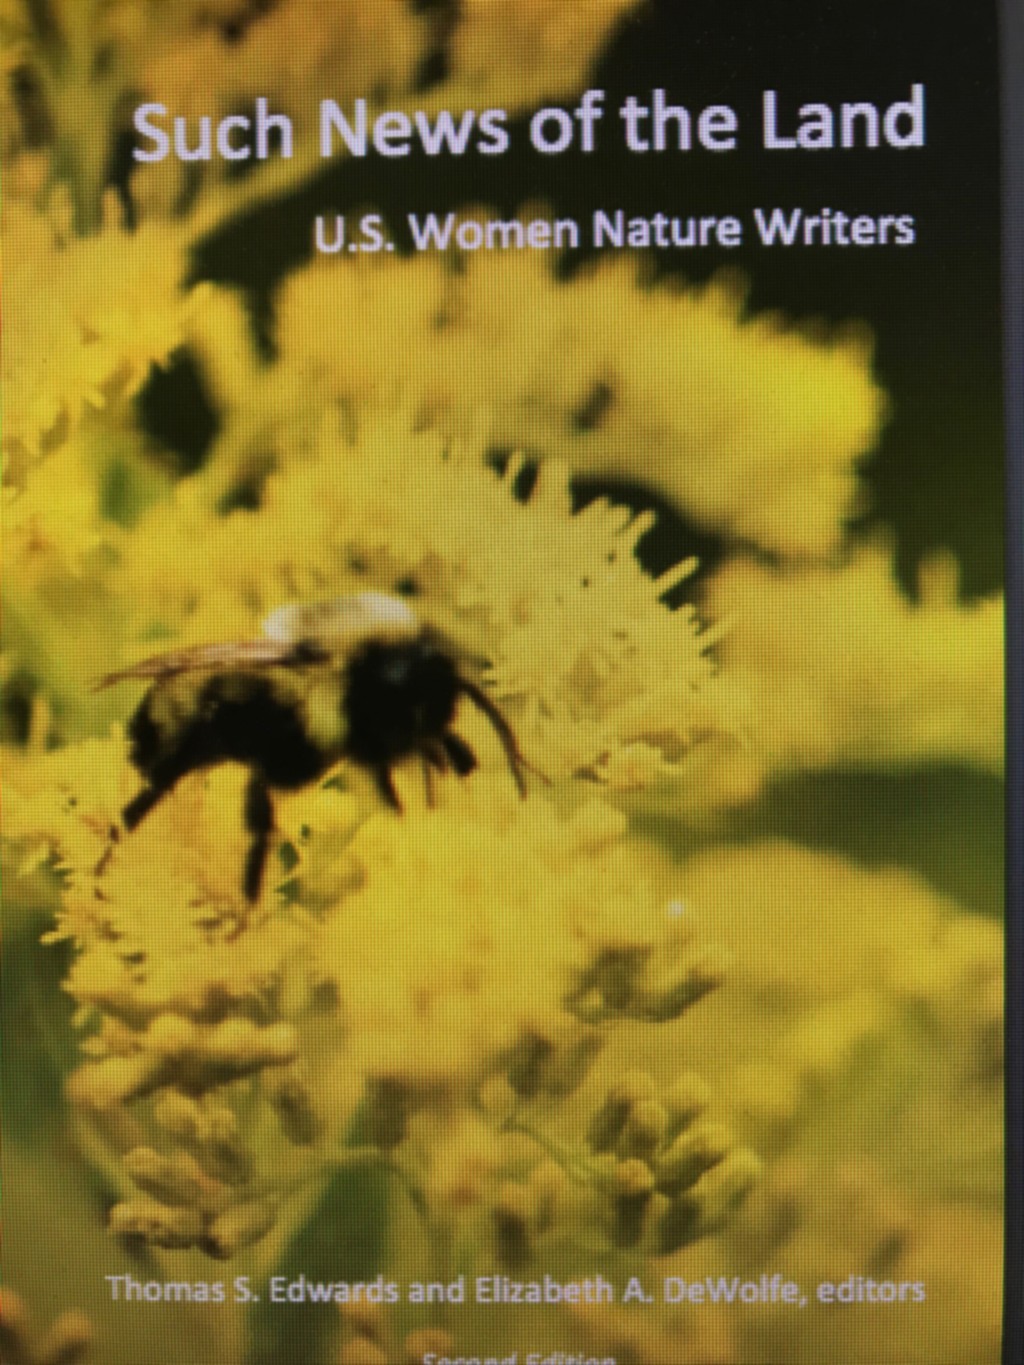 Such News of the Land: U.S. Women Nature Writers is a collection of essays